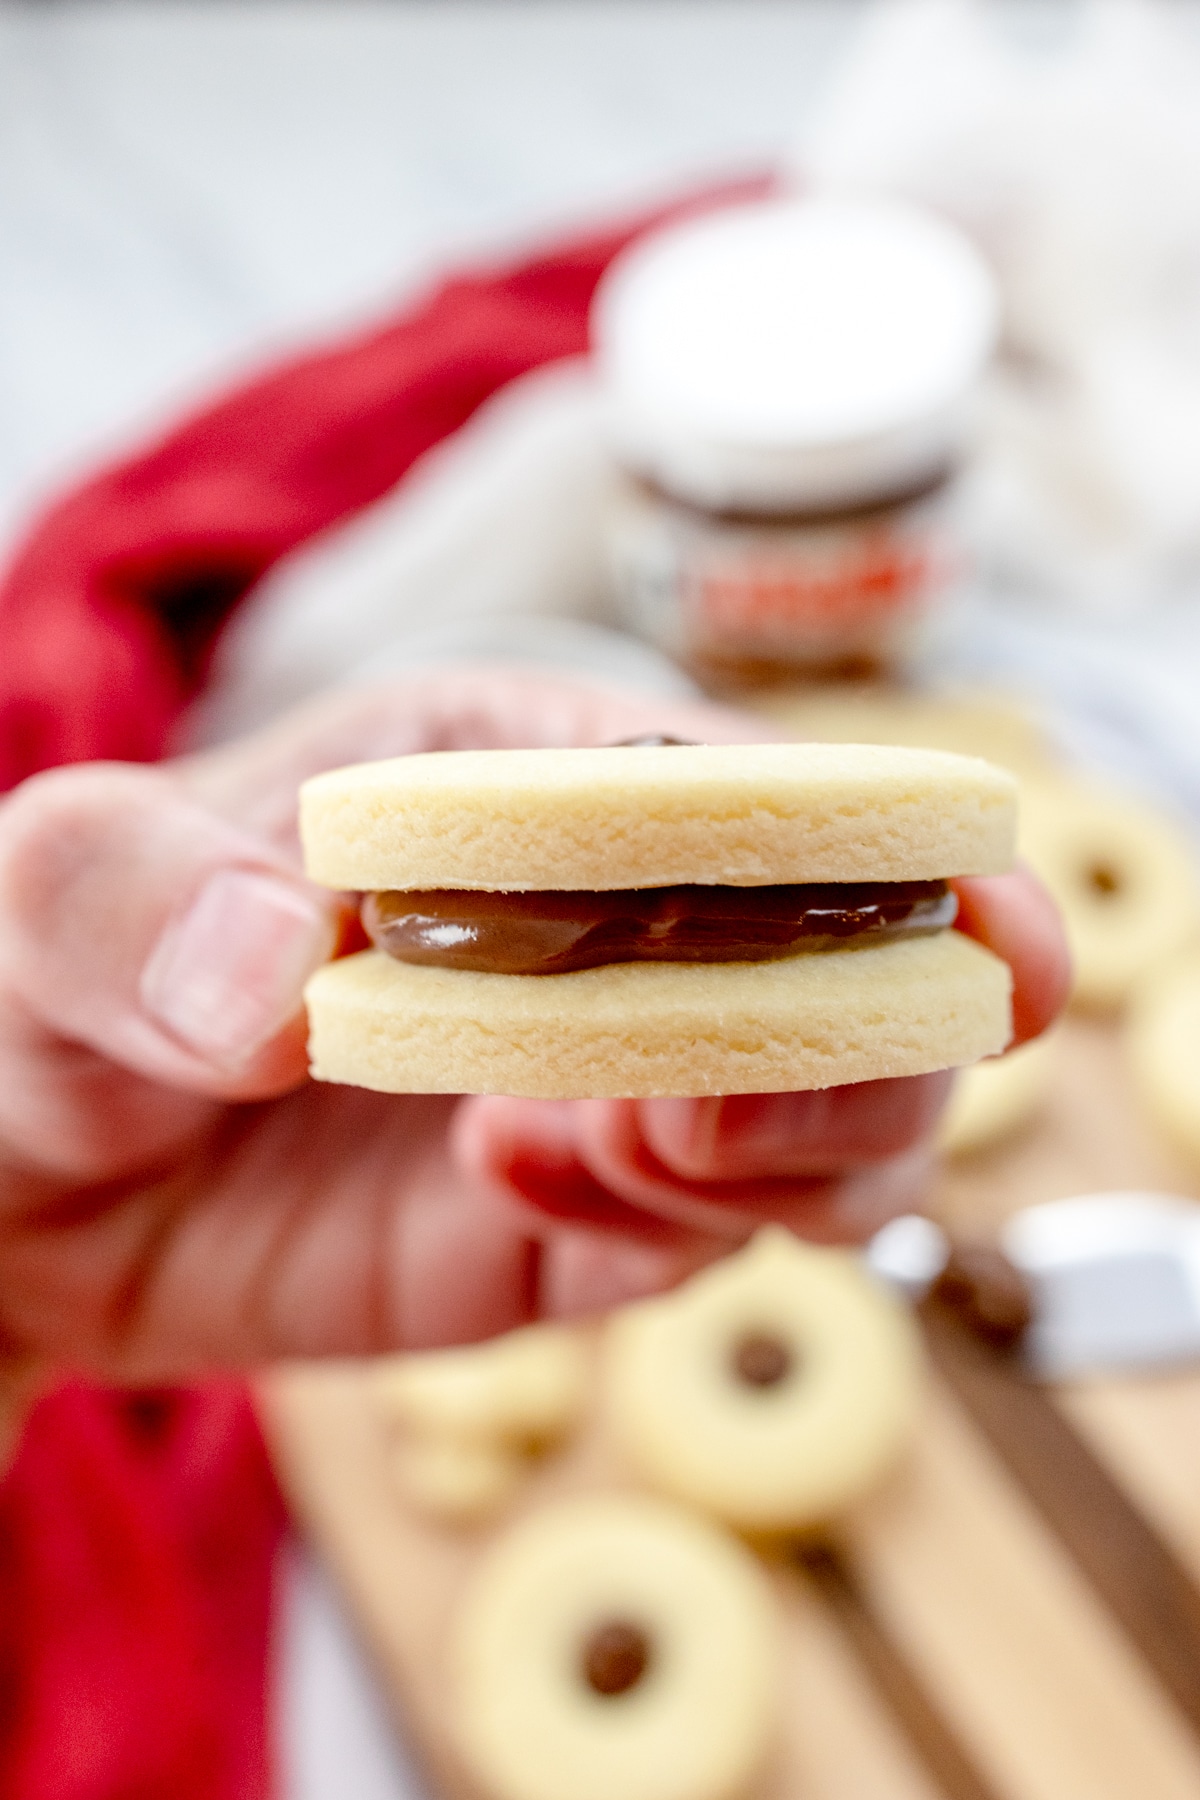 Close up and side-view of a hand holding a finished cookie with a dollop of chocolate sandwiched between two cookies.